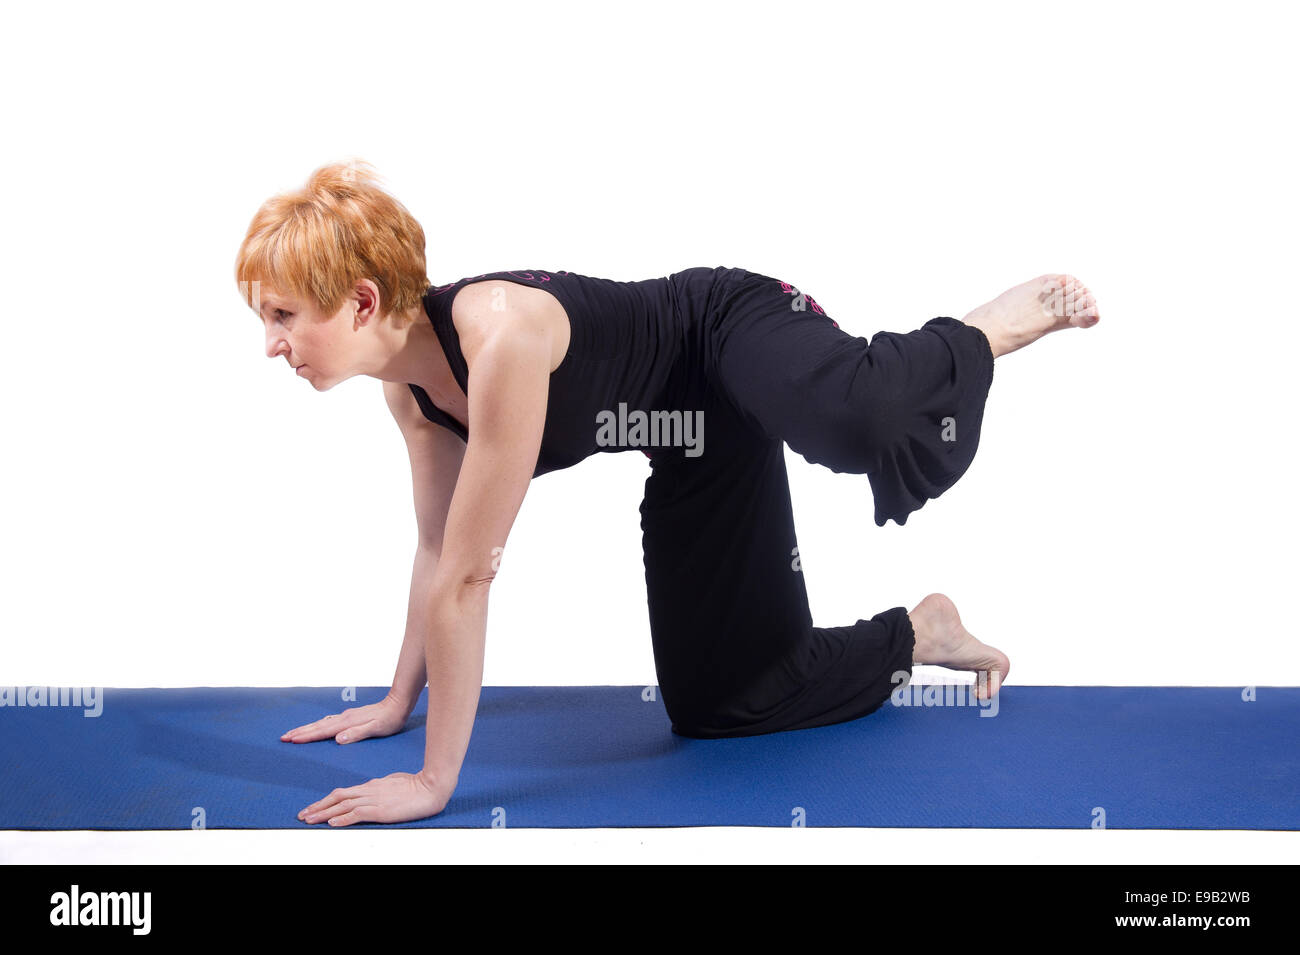 Woman on exercise mat sports Banque D'Images